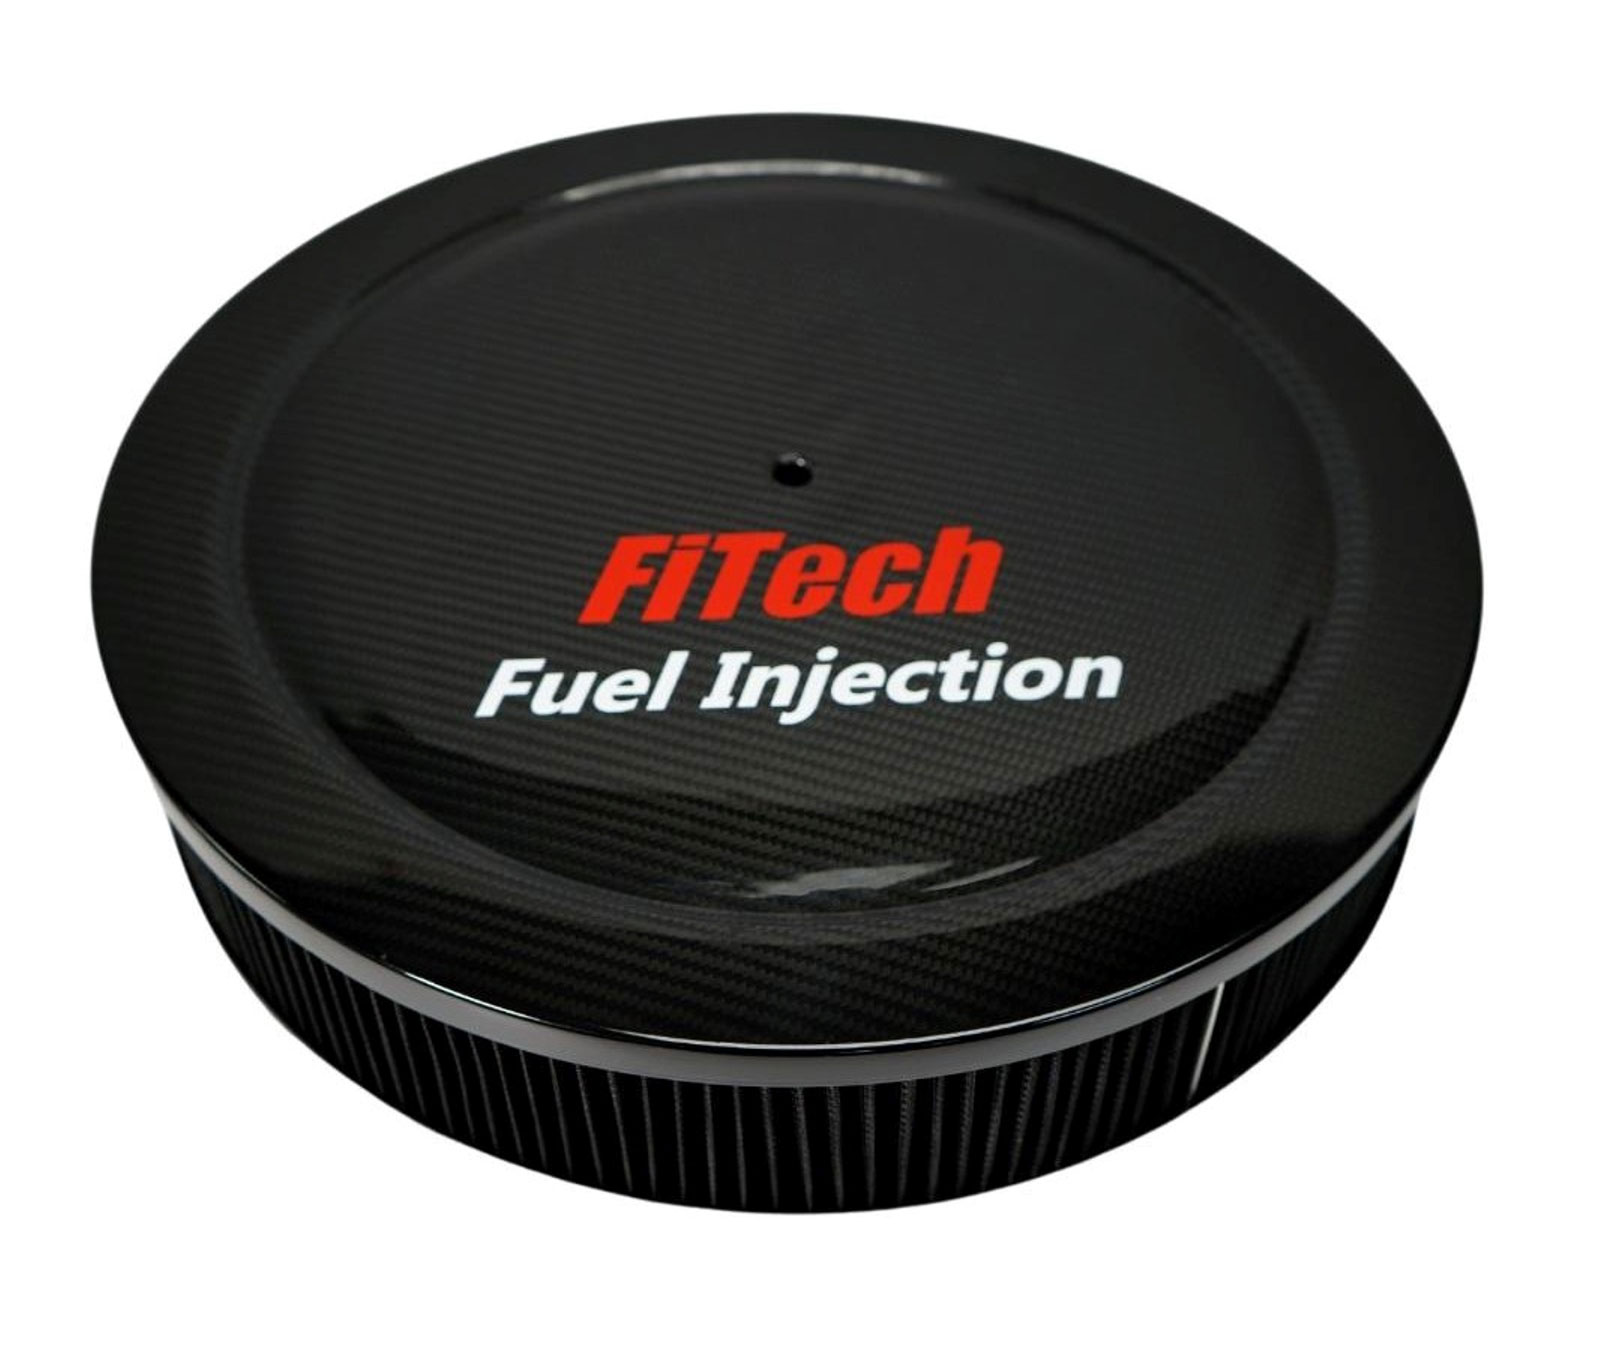 06 FiTech Low Profile Air Cleaner